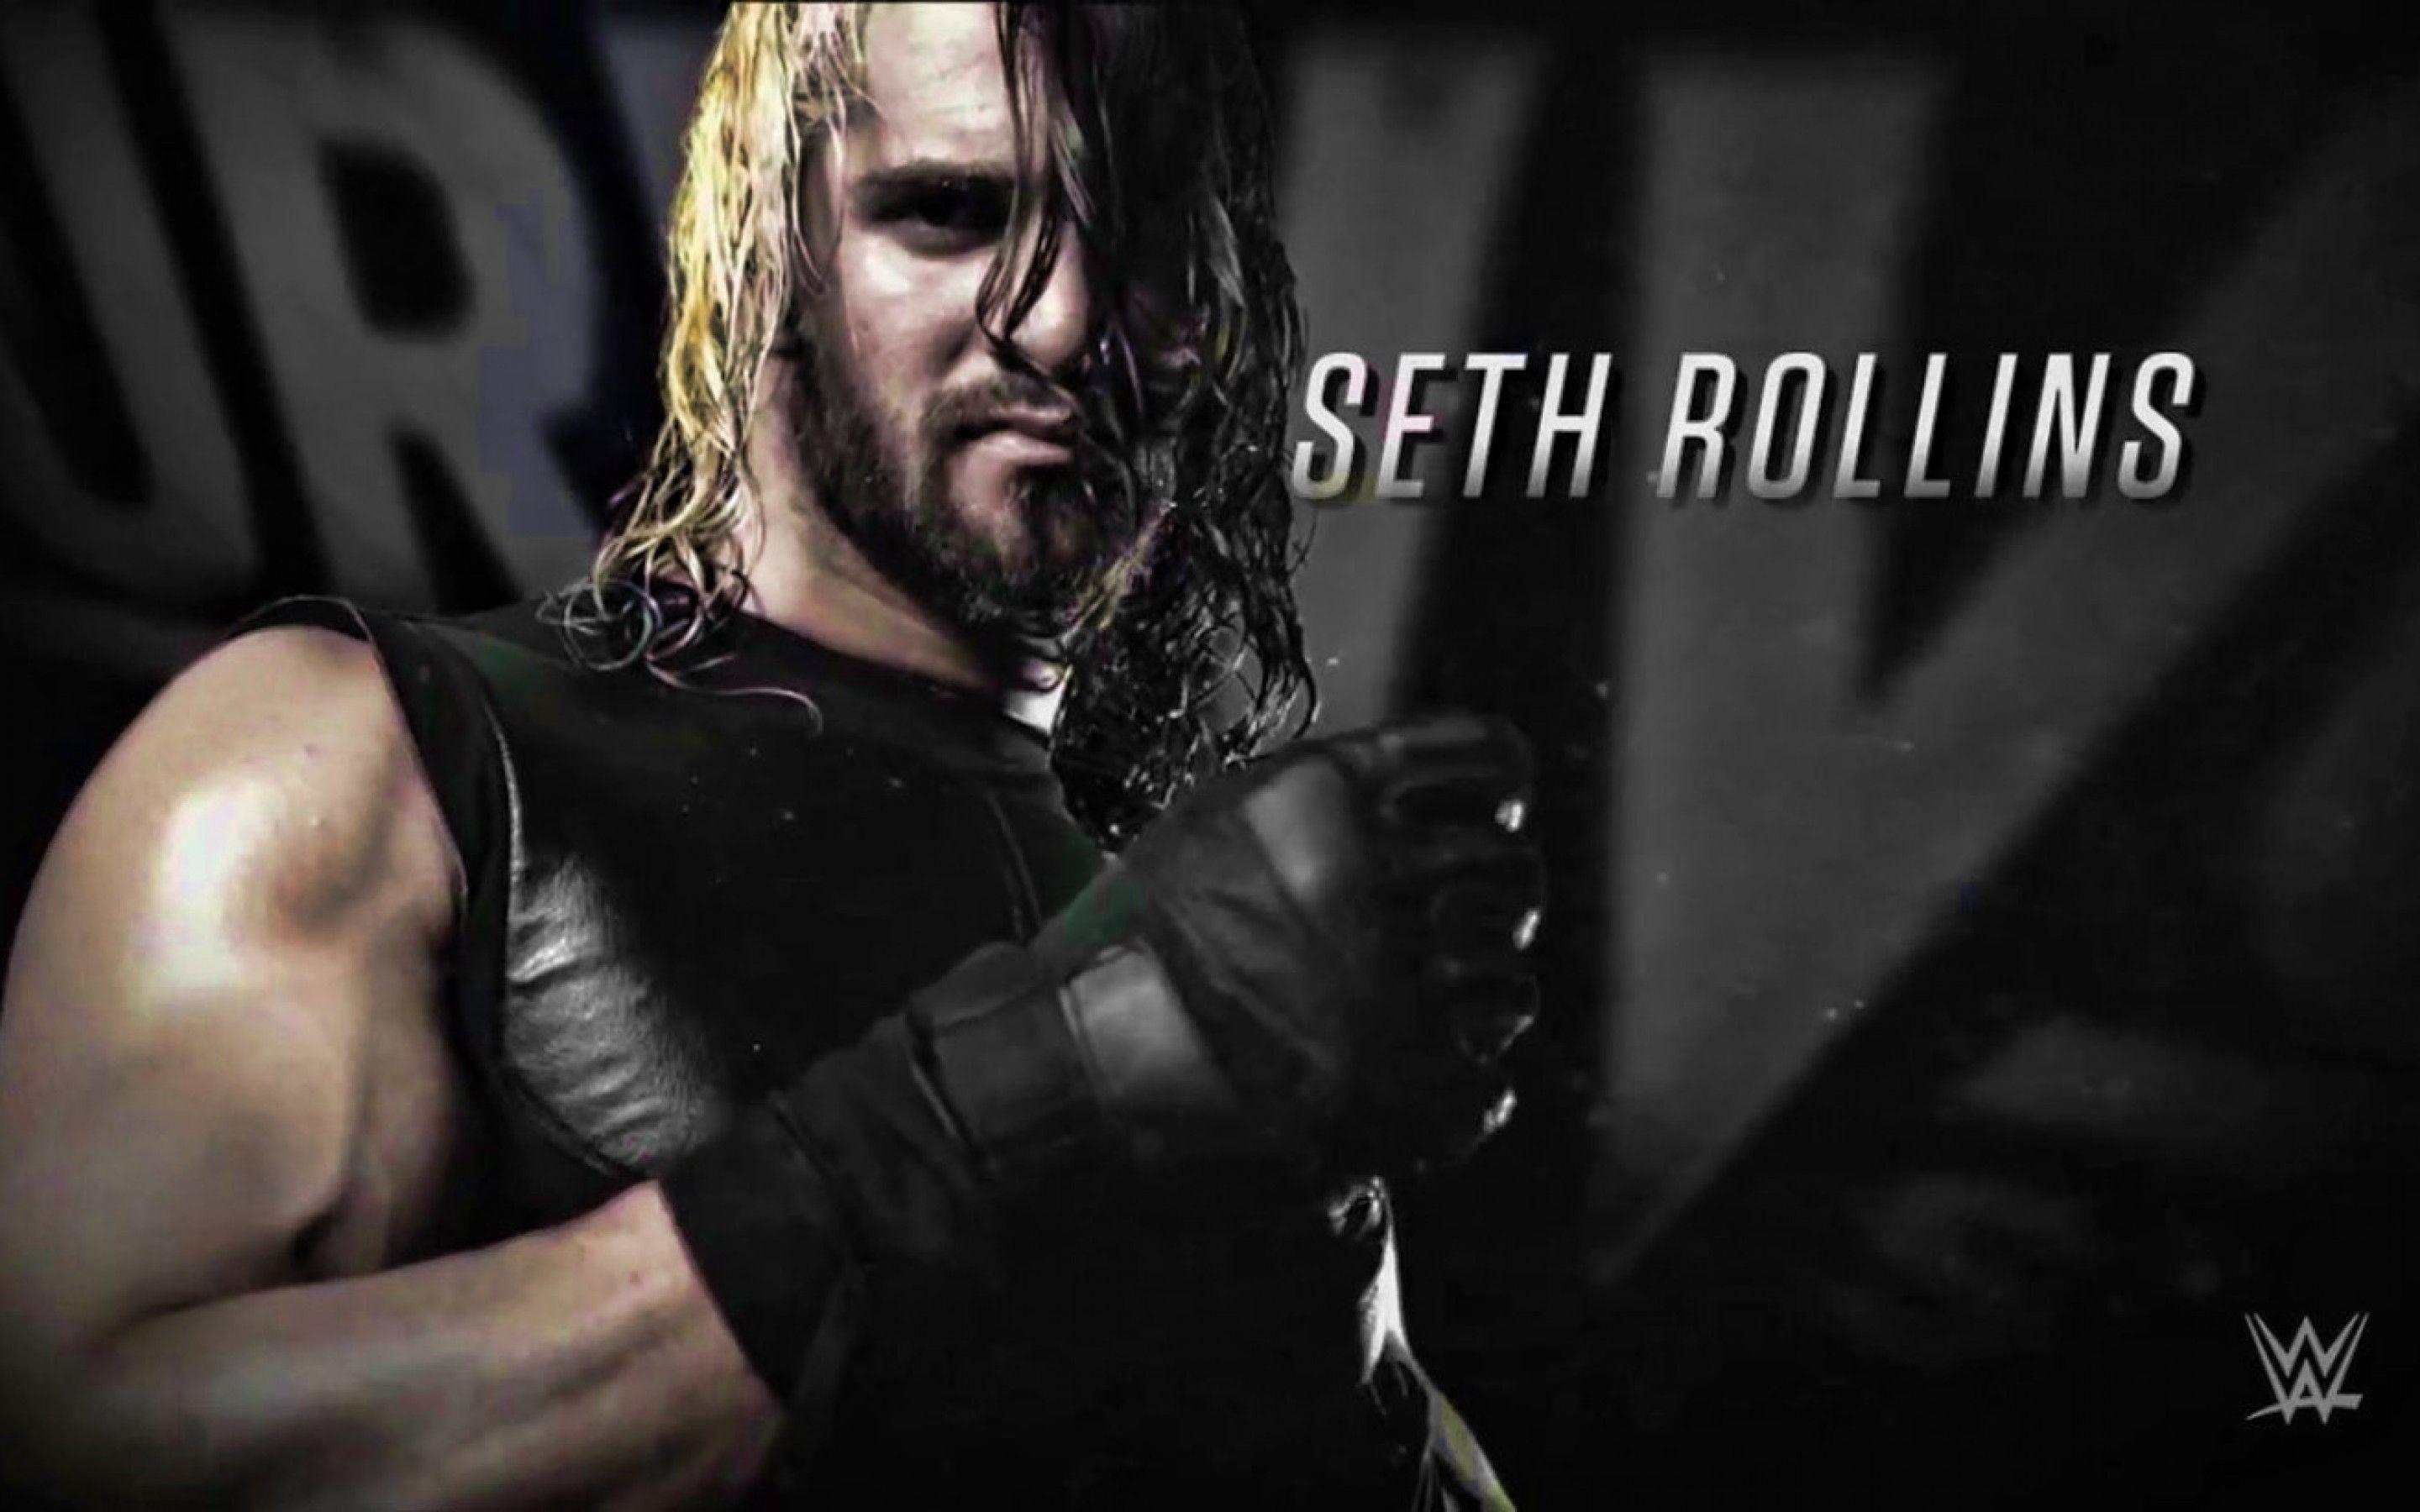 Seth Rollins Wallpaper Wallpaper Background of Your Choice